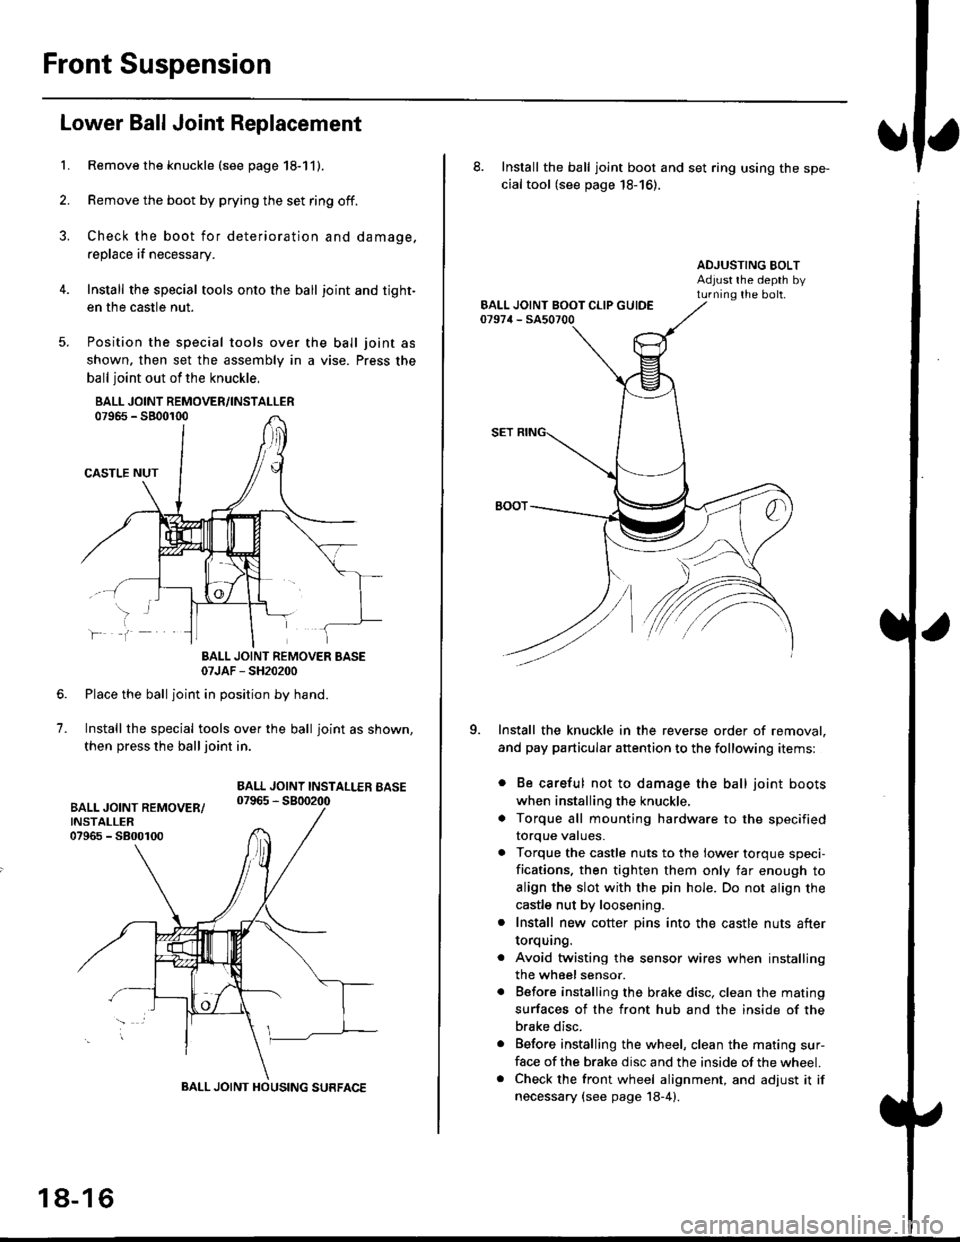 HONDA CIVIC 1997 6.G Owners Guide Front Suspension
L
Lower Ball Joint Replacement
Remove the knuckle (see page 18-11).
Remove the boot by prying the set ring off.
Check the boot for deterioration and damage.
replace if necessary.
Inst